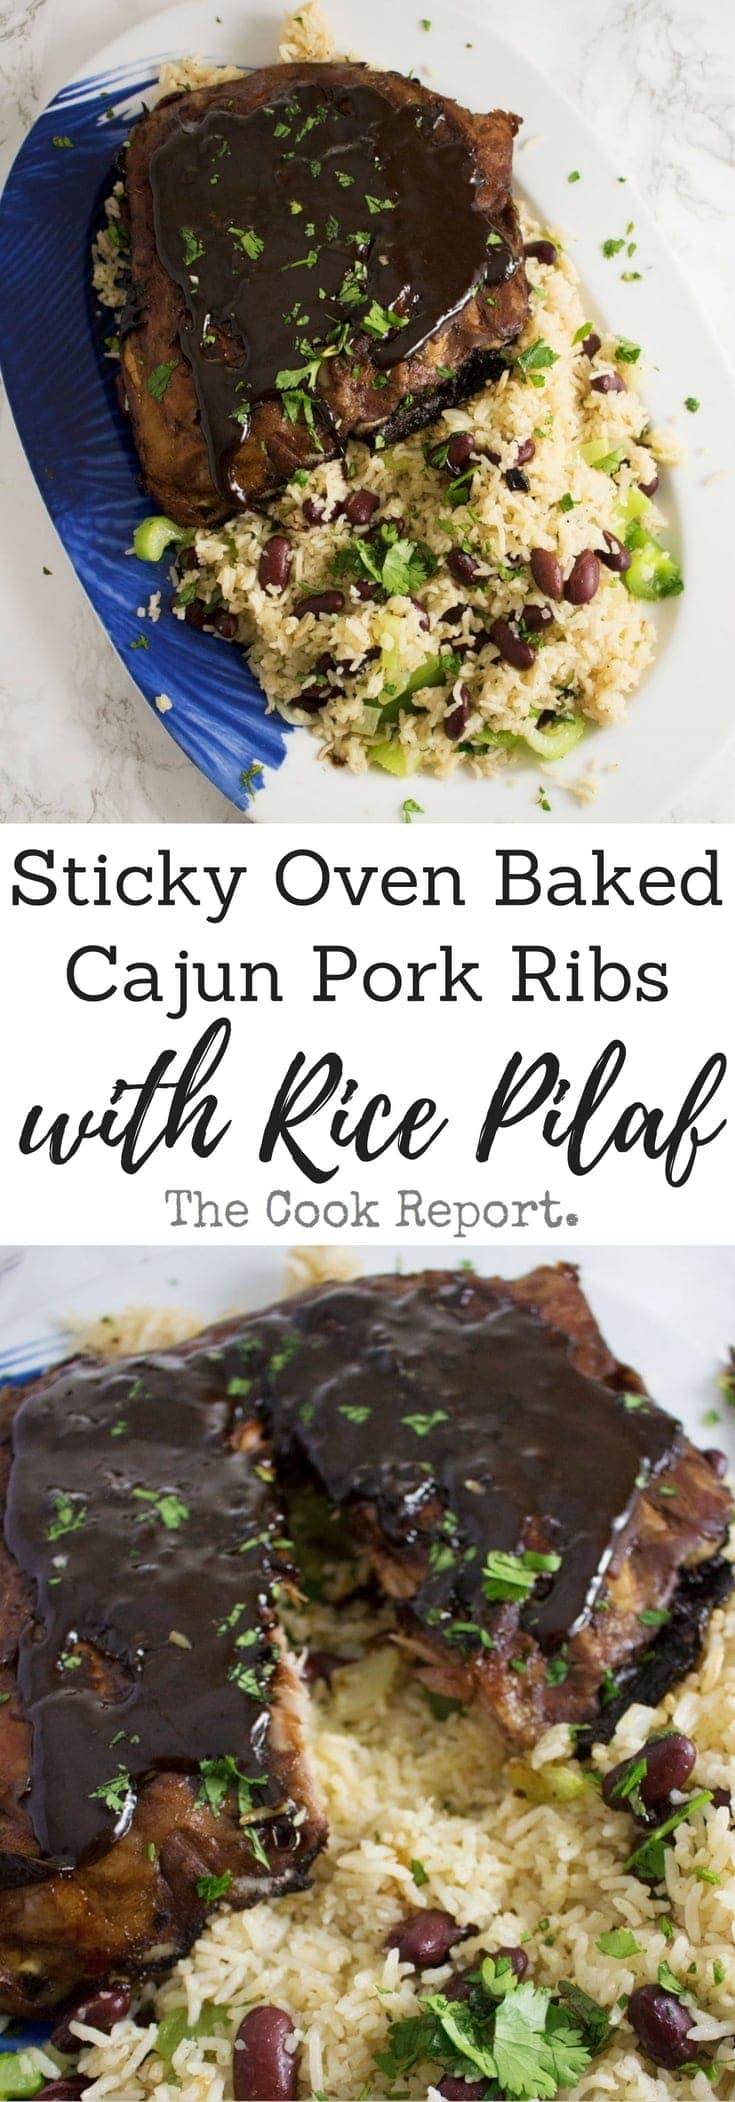 These sticky oven baked Cajun pork ribs are the perfect autumn dinner. Made with a brown sugar and spice dry rub and cooked in a flavourful braising liquid.